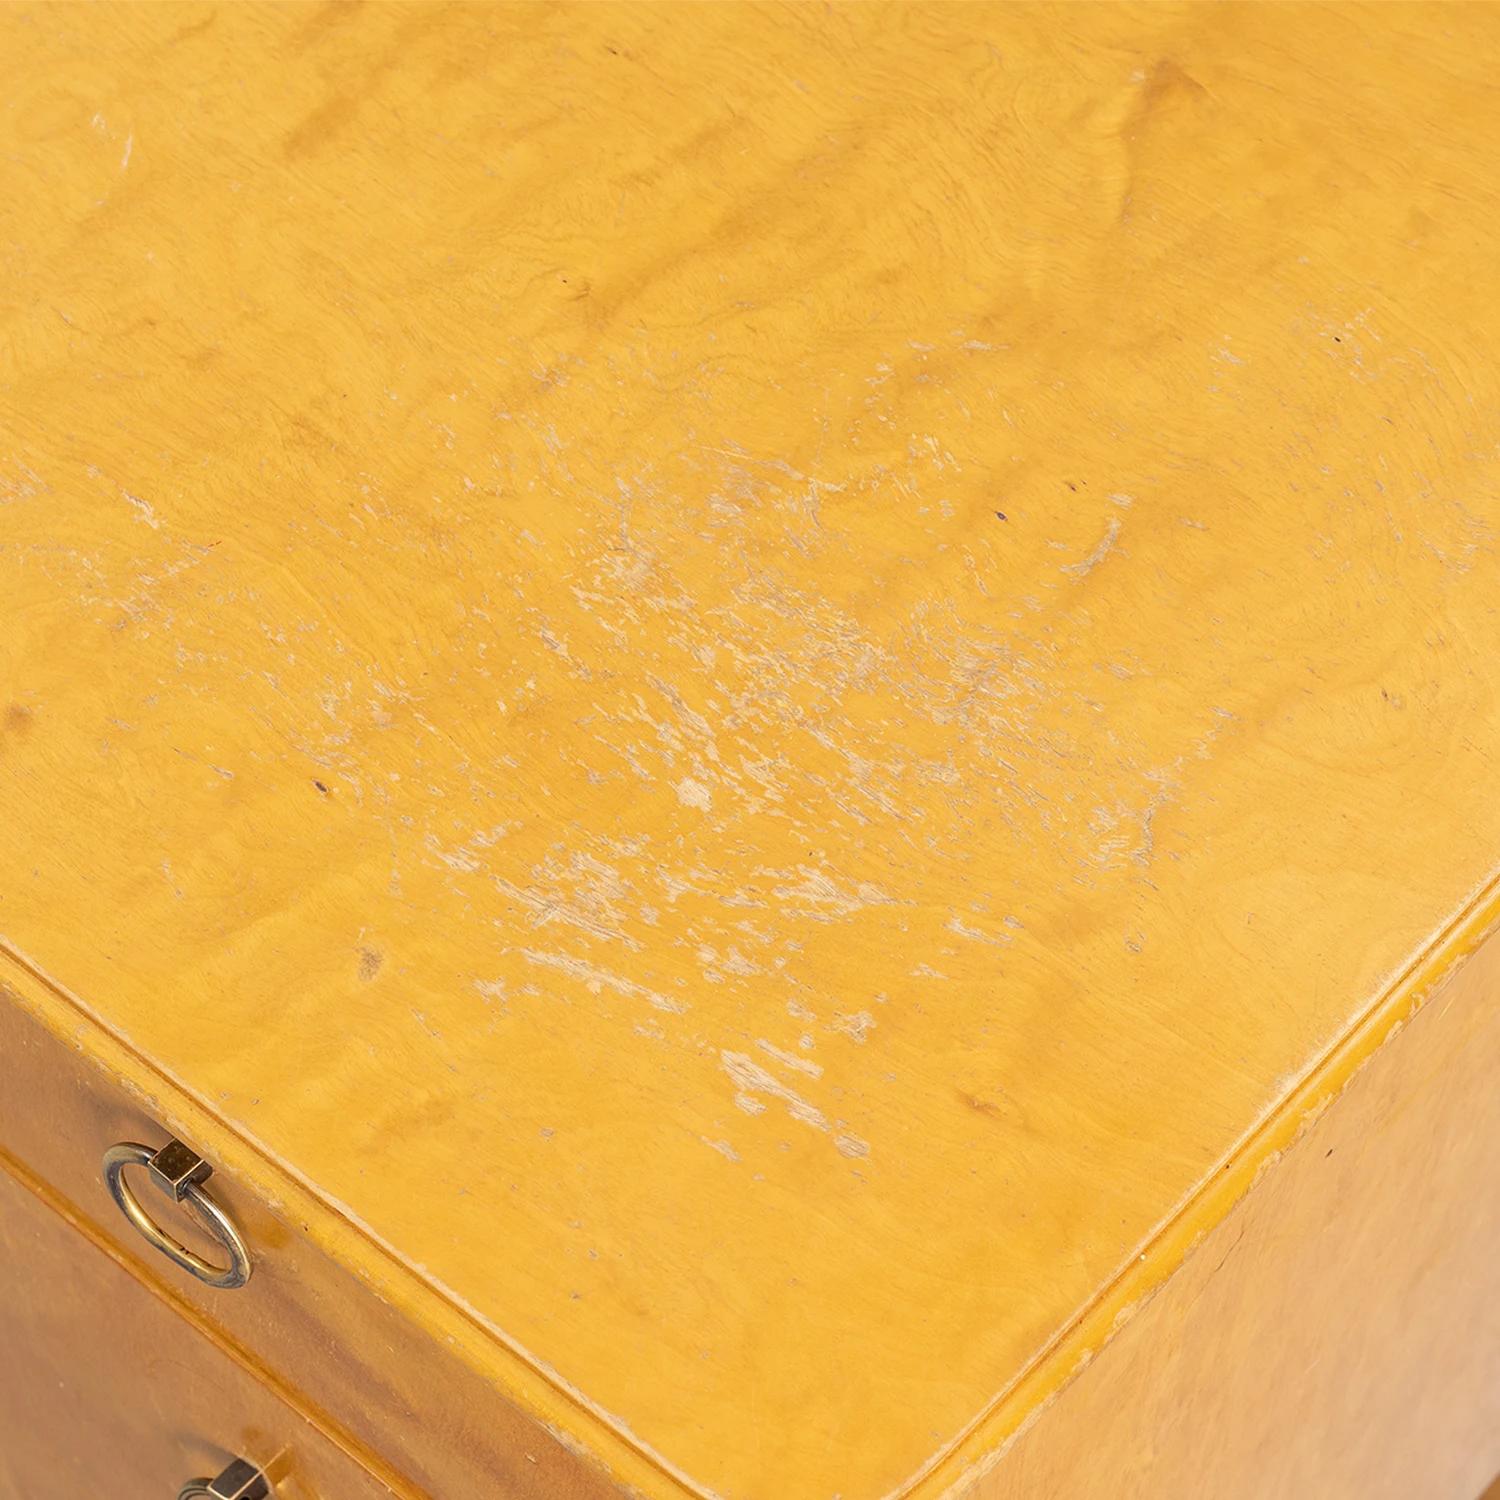 20th Century Swedish Birchwood Chest of Drawers by AB Åsundens Möbelfabrik In Good Condition For Sale In West Palm Beach, FL